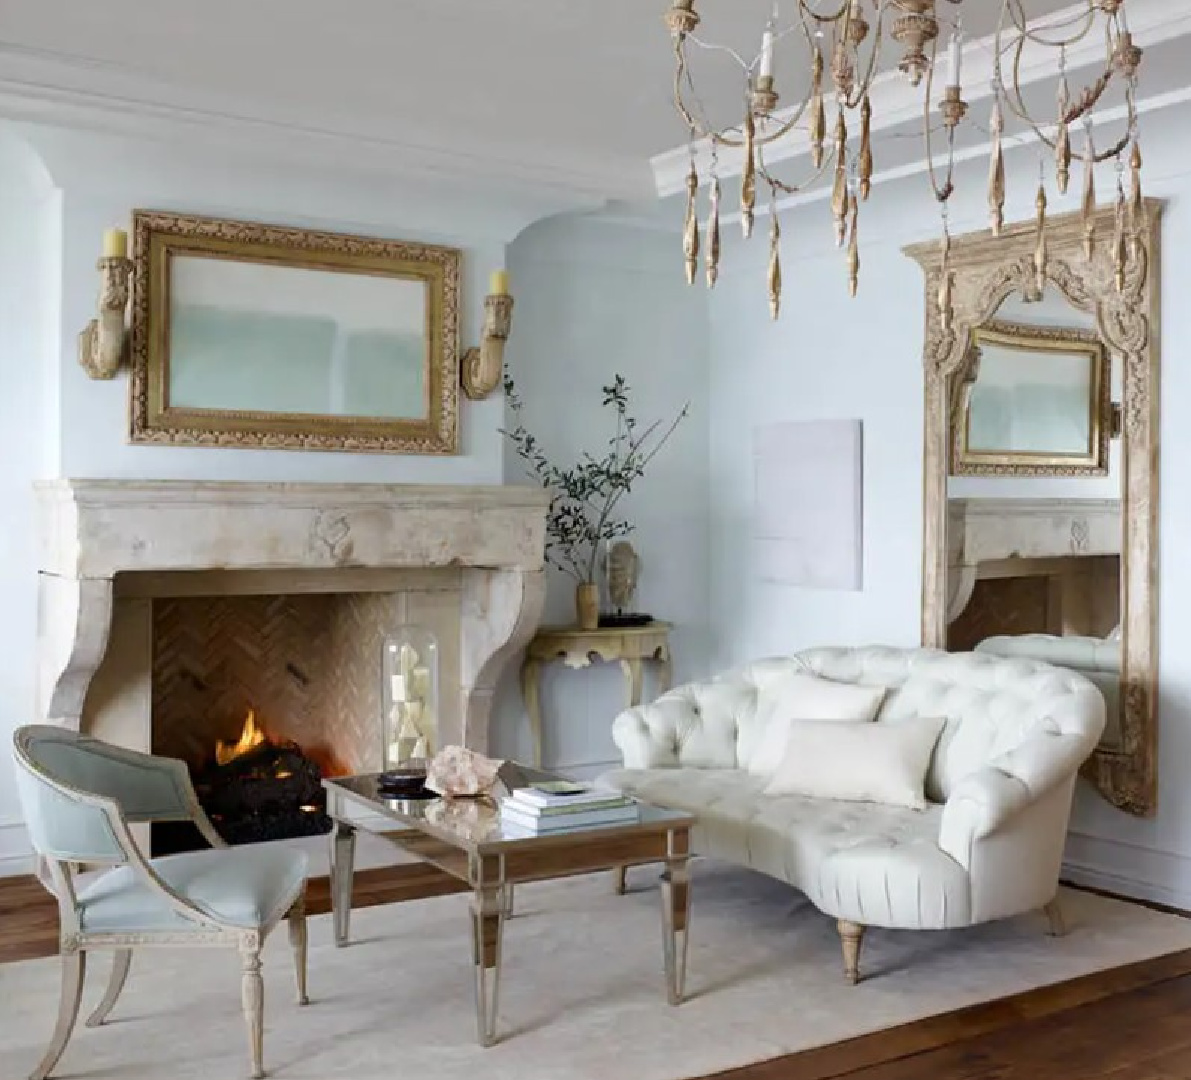 Breathtaking French country living room with stone fireplace and pale blue walls - Ohara Davies Gaetano Interiors. #frenchblue #frenchlivingroom